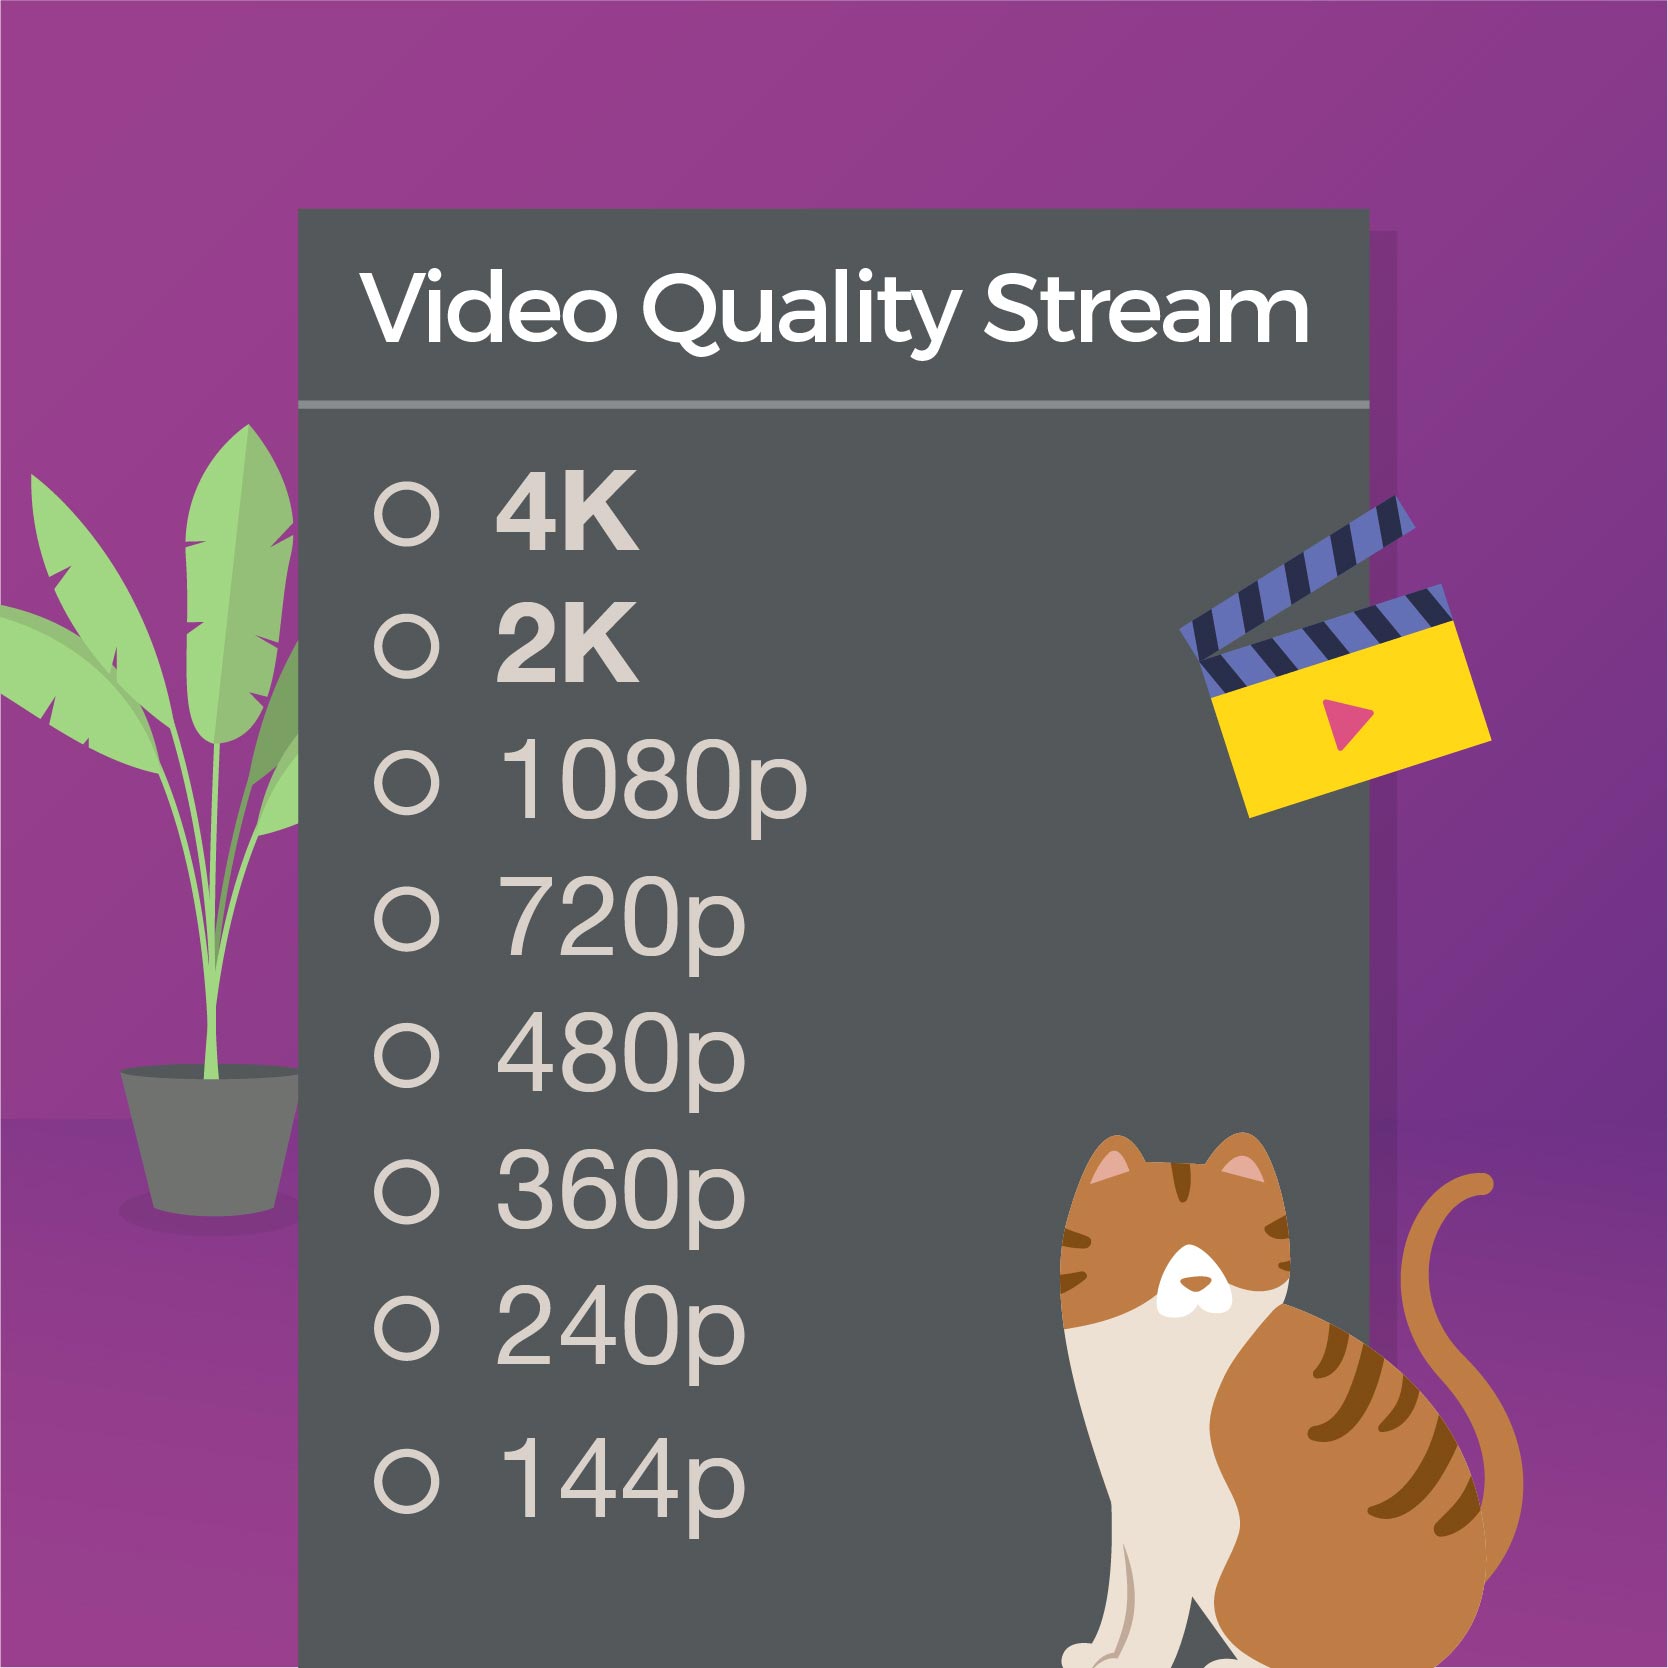 What video quality stream normally?